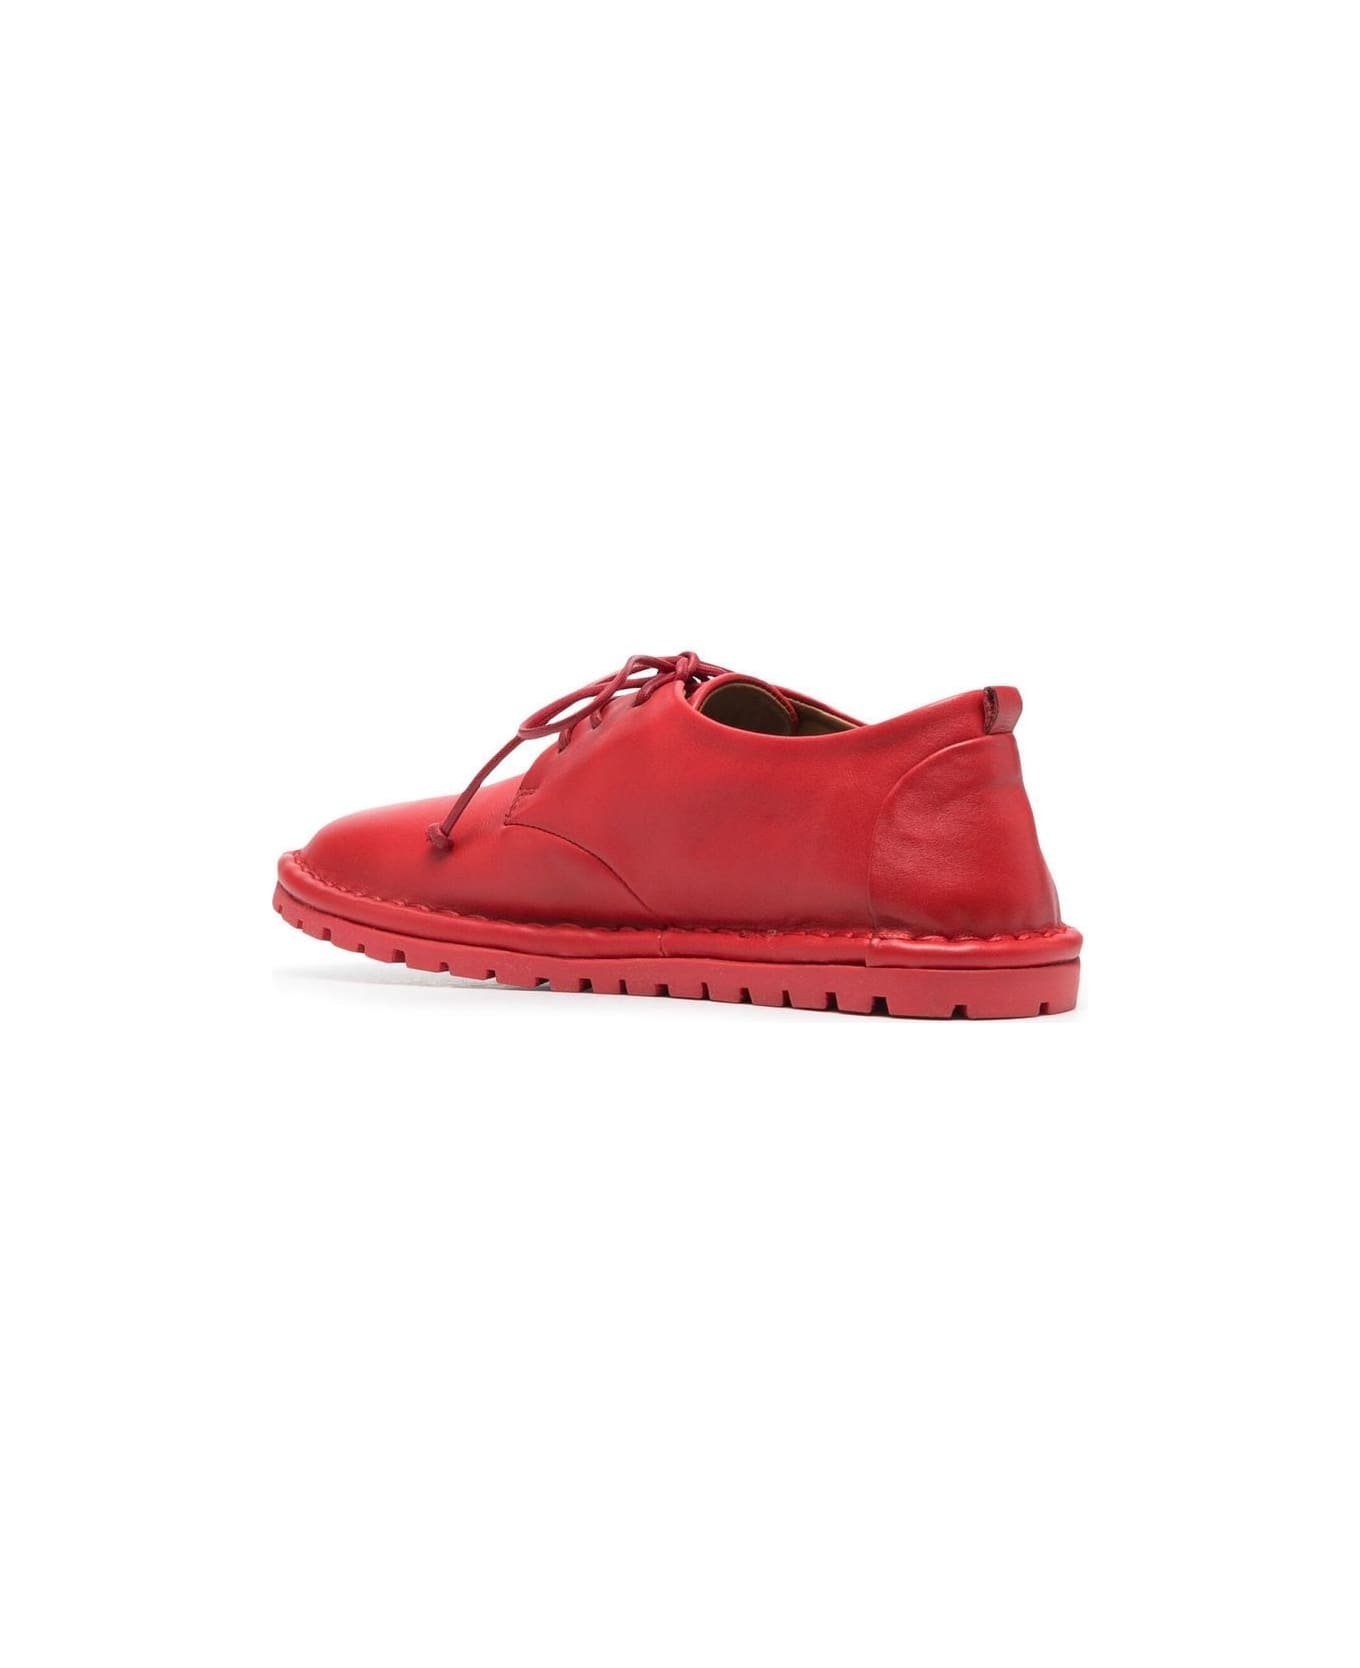 Marsell Sancrispa Derby Shoes - Red